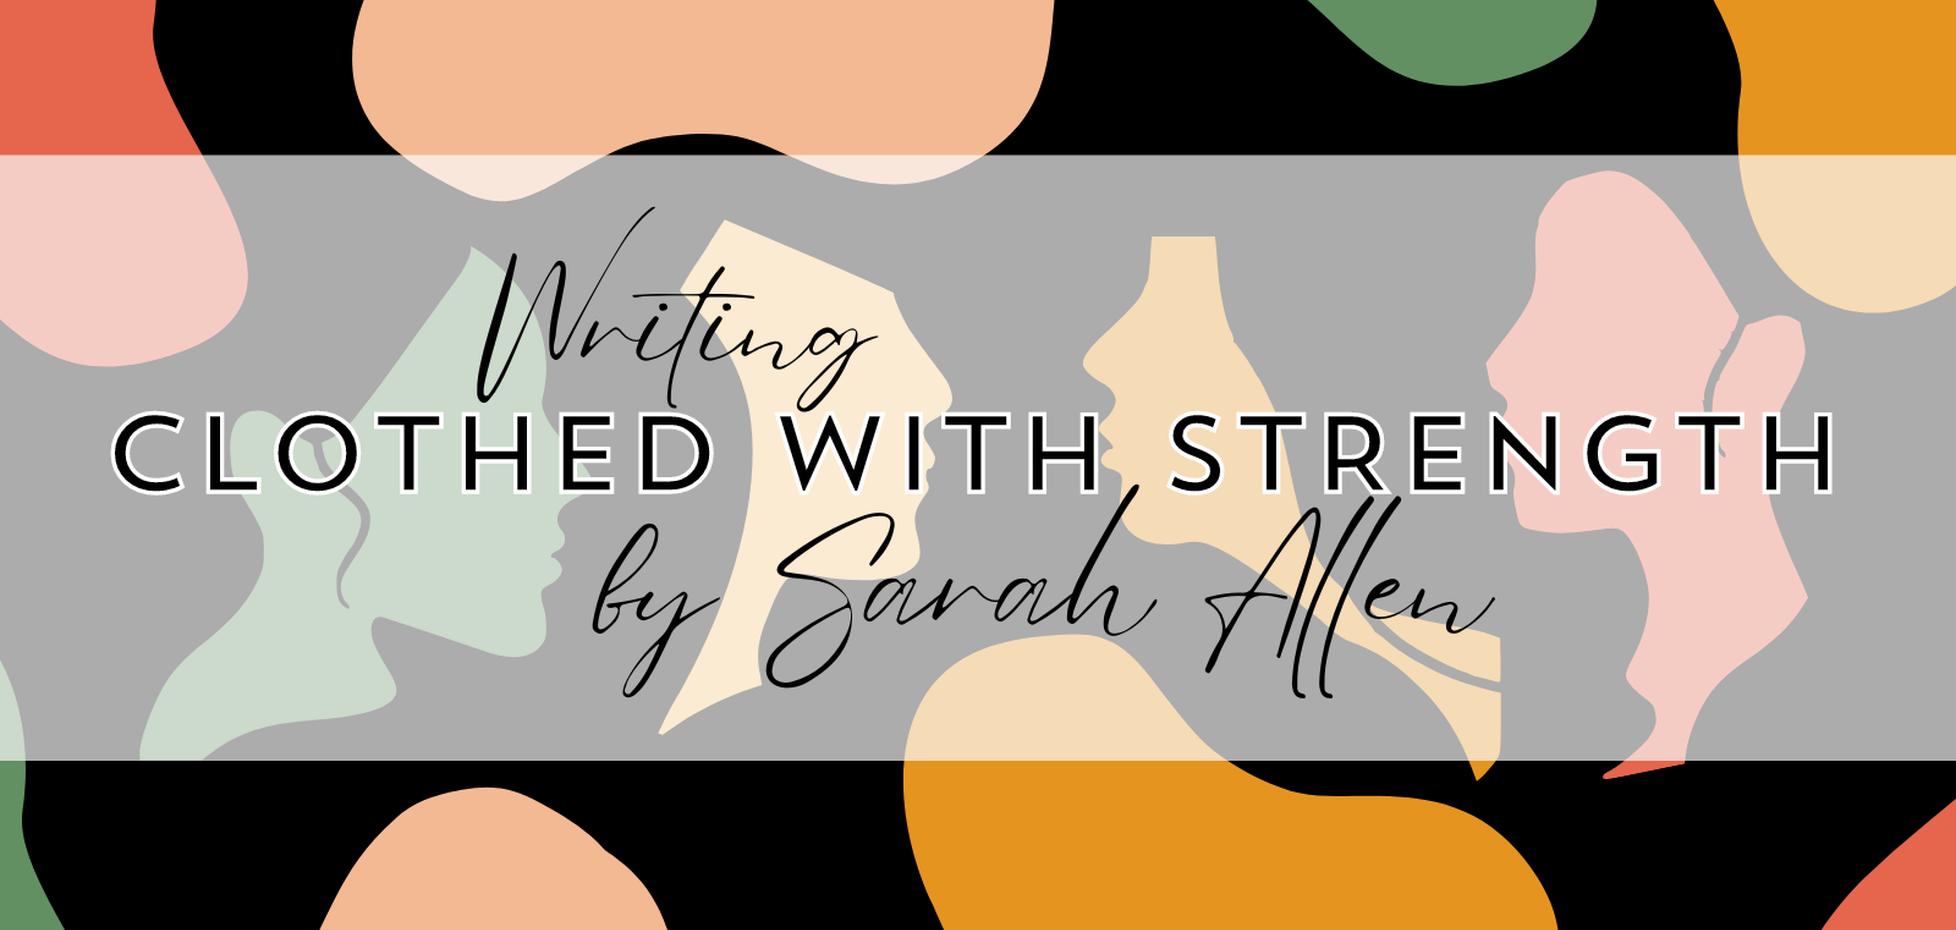 Writing Clothed With Strength